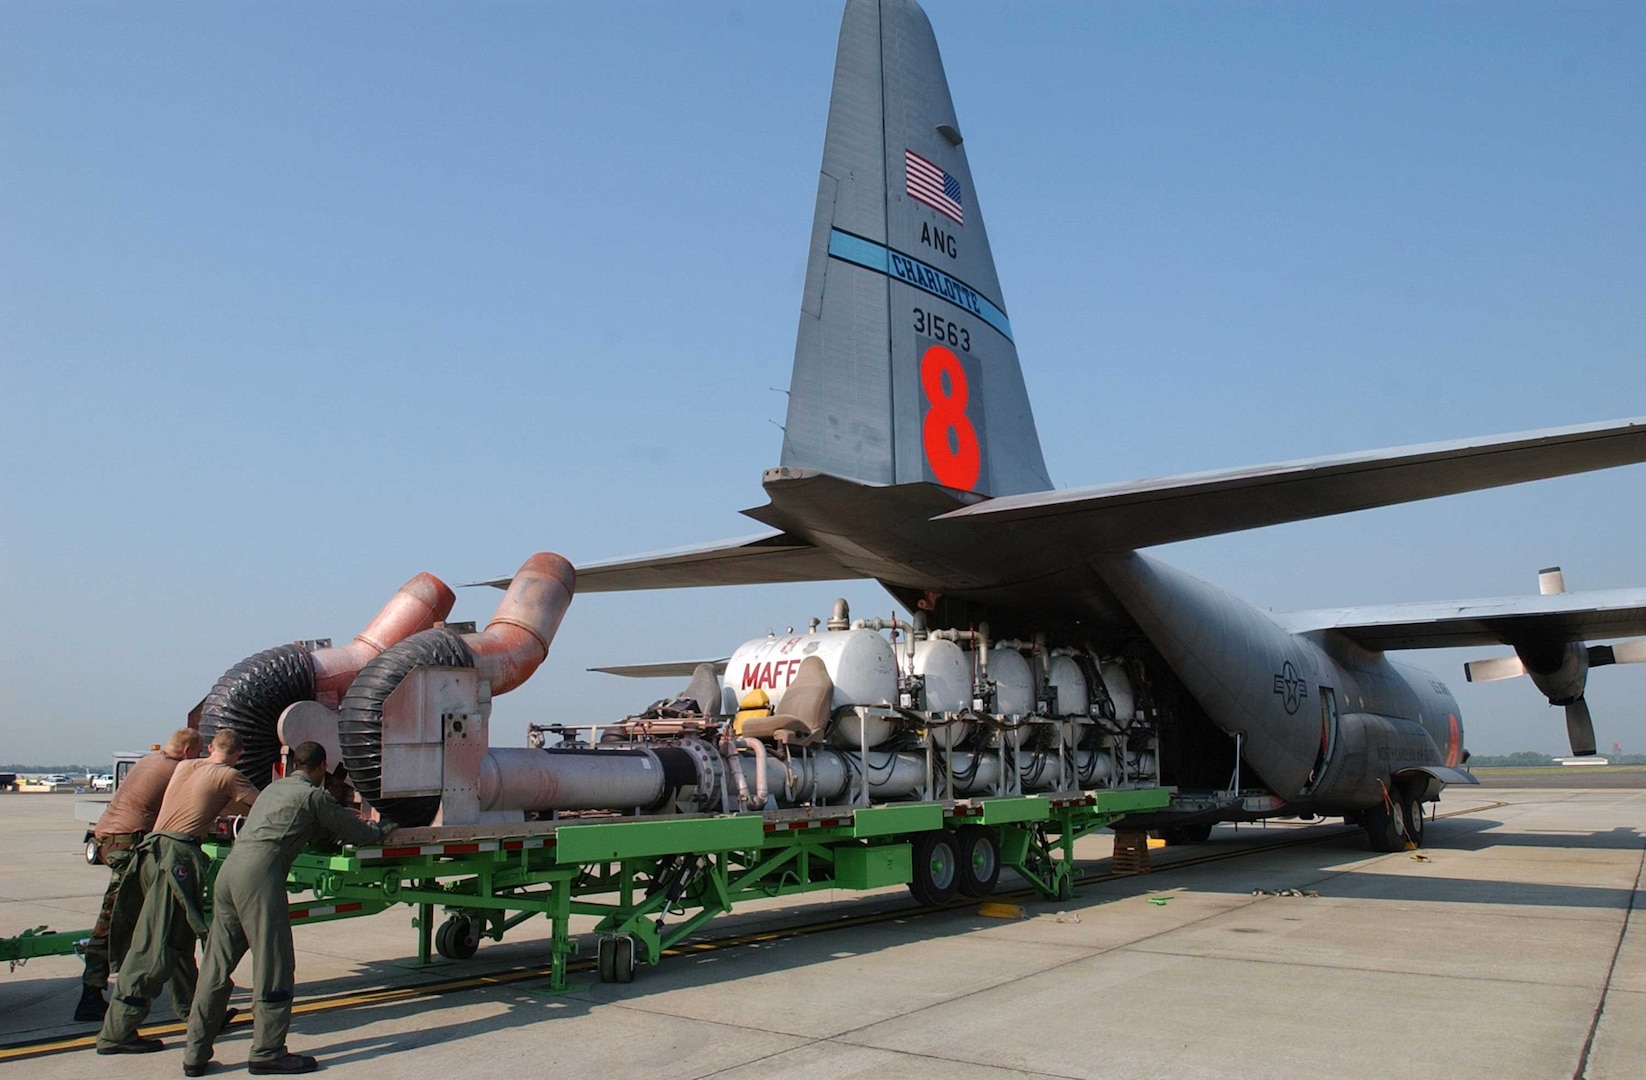 Airmen from the North Carolina Air National Guard's 145th Airlift Wing push a modular airborne fire fighting system onto a C-130 Hercules. The system is a series of pressurized tanks that hold 3,000 gallons of flame-retardant liquid. The retardant is dropped along the leading edge of a fire to block the spread of flames.